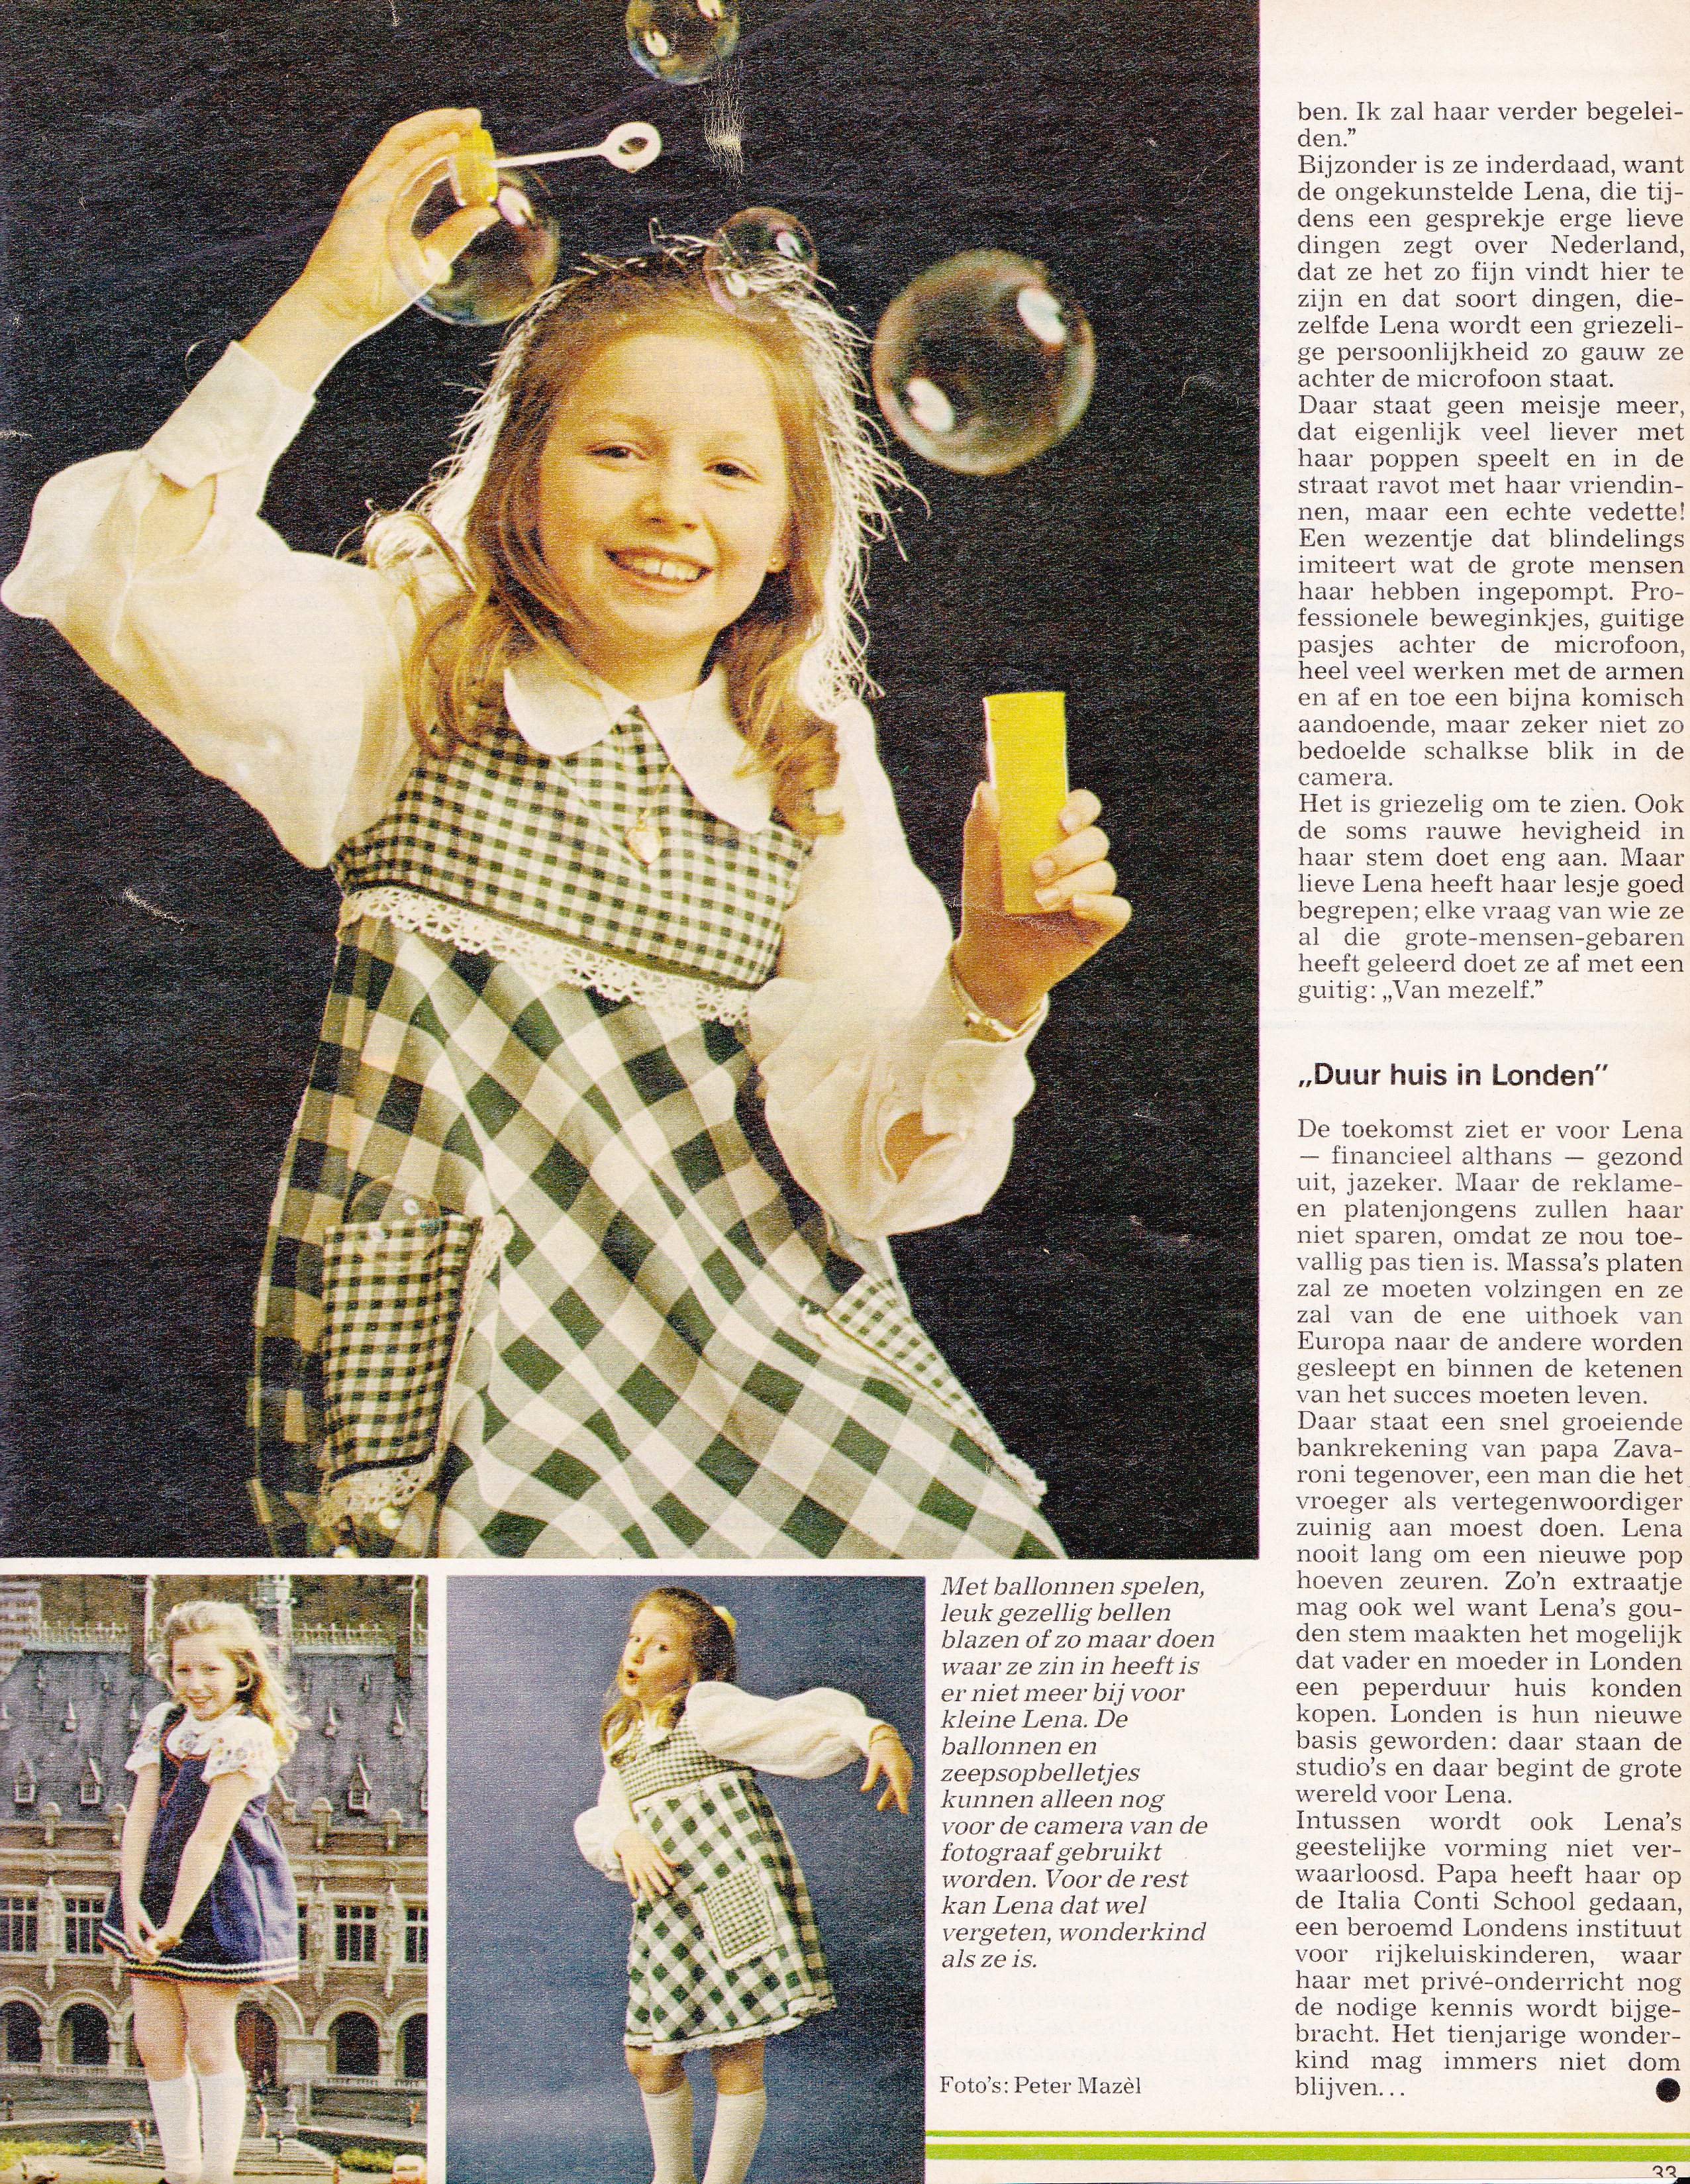 Second Page Of The Article Abount Lena Zavaroni In The Magazine Story Dated 21 June 1974